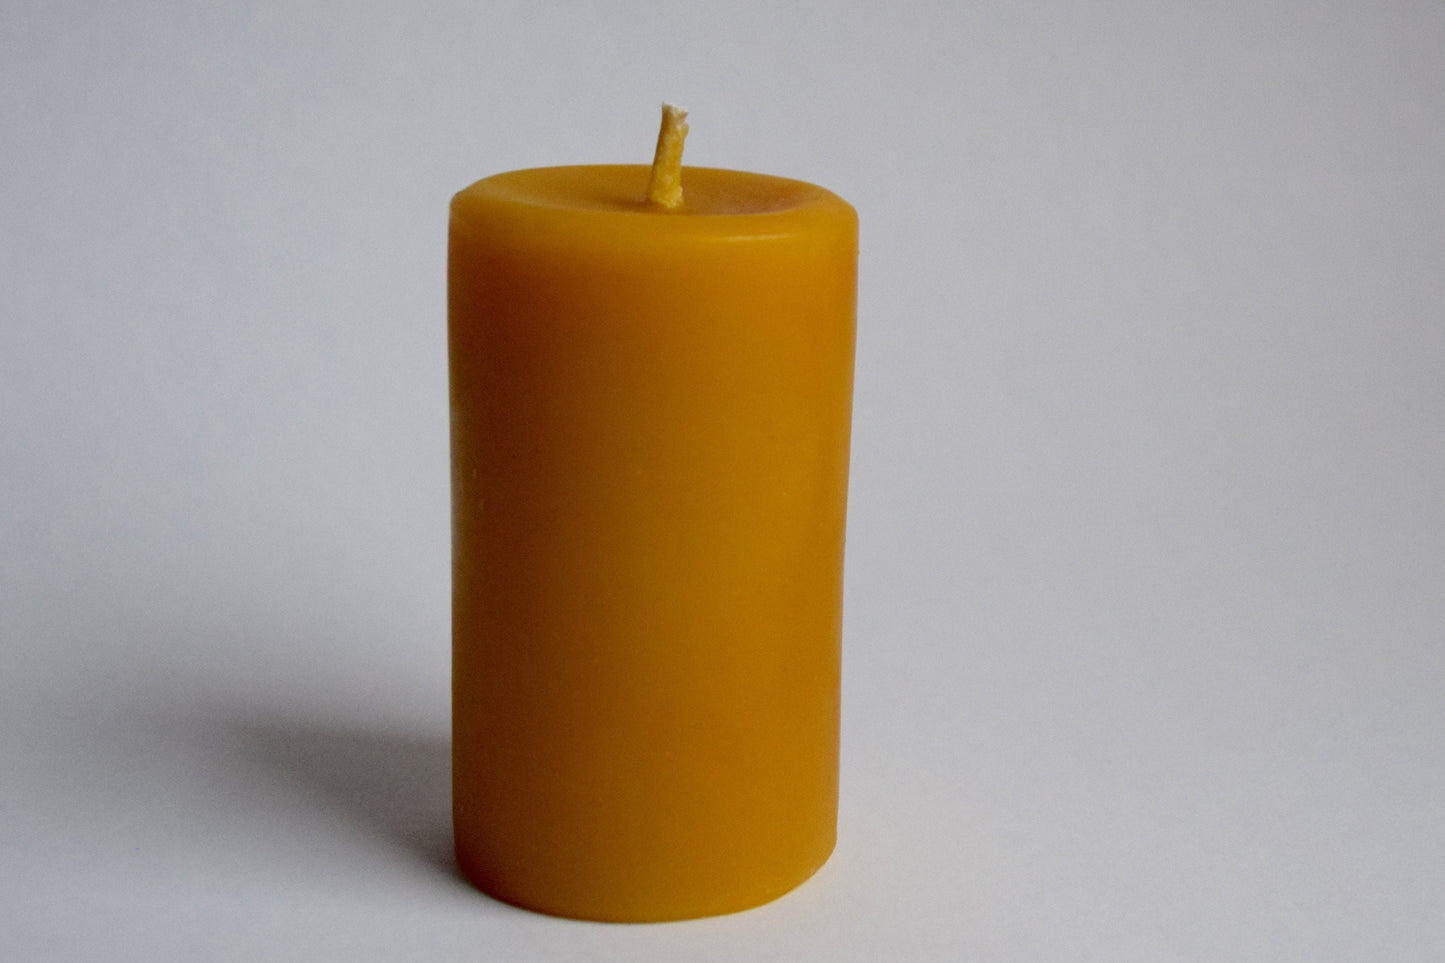 Smooth Pillar Beeswax Candle 3" // Beeswax Candle, Candle, Beeswax, Small Pillar Candle, Eco Friendly, Non Toxic